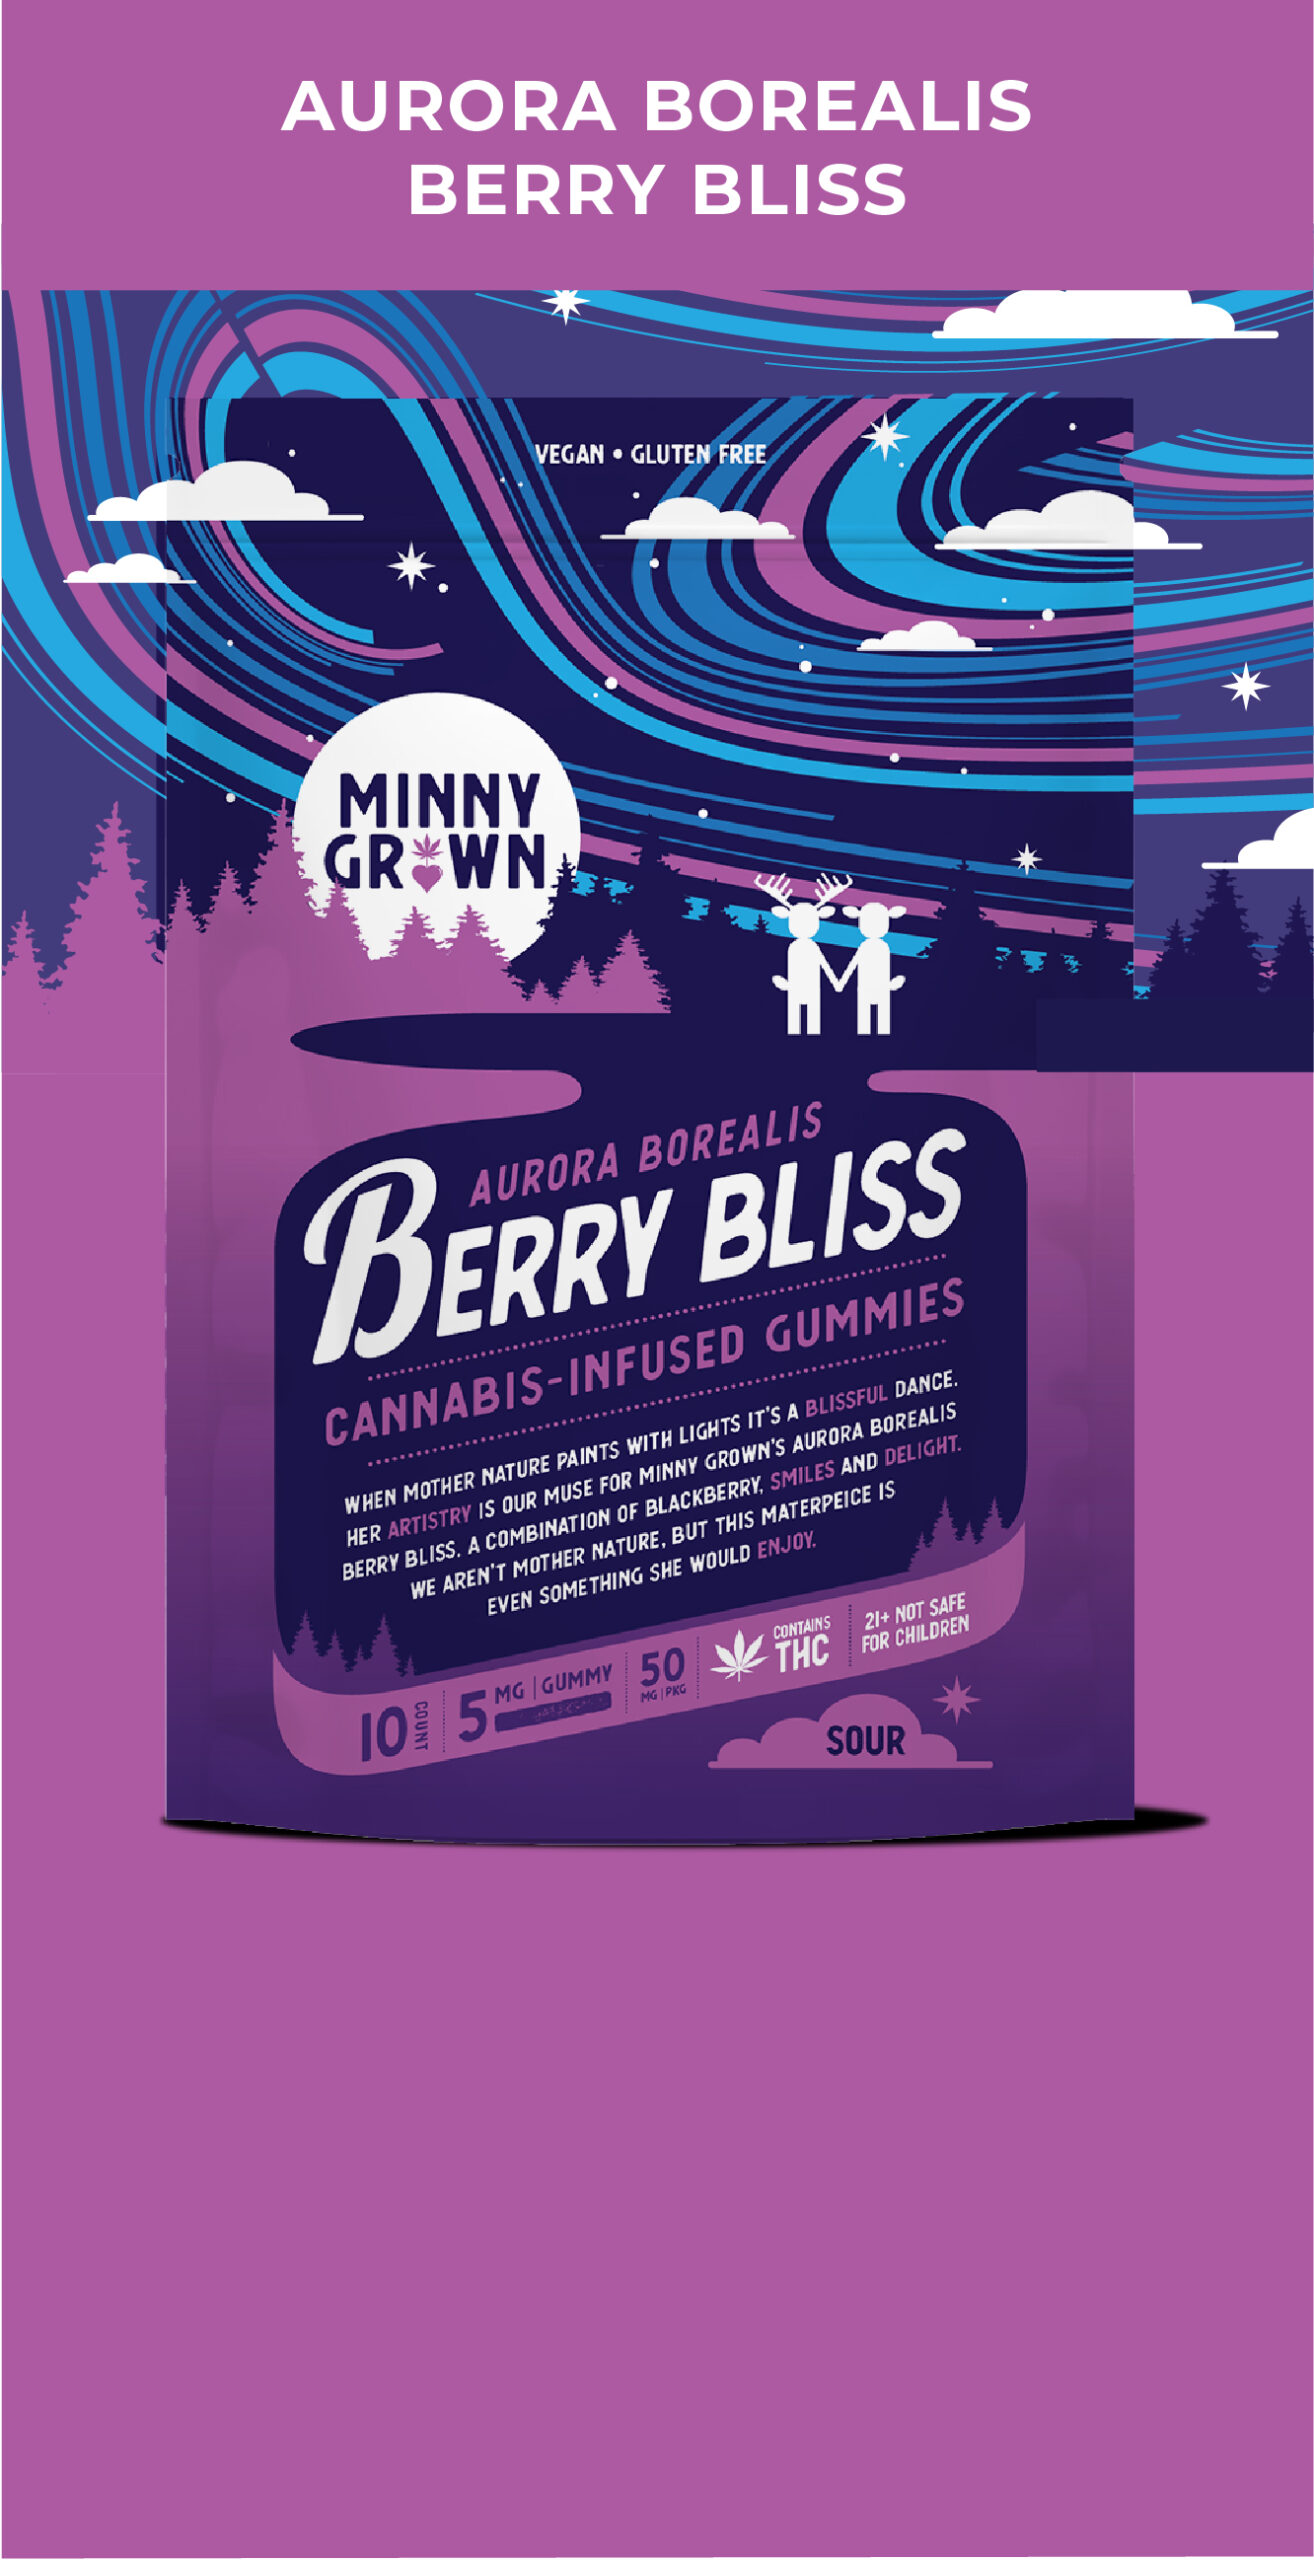 Featured image for “Berry Bliss”